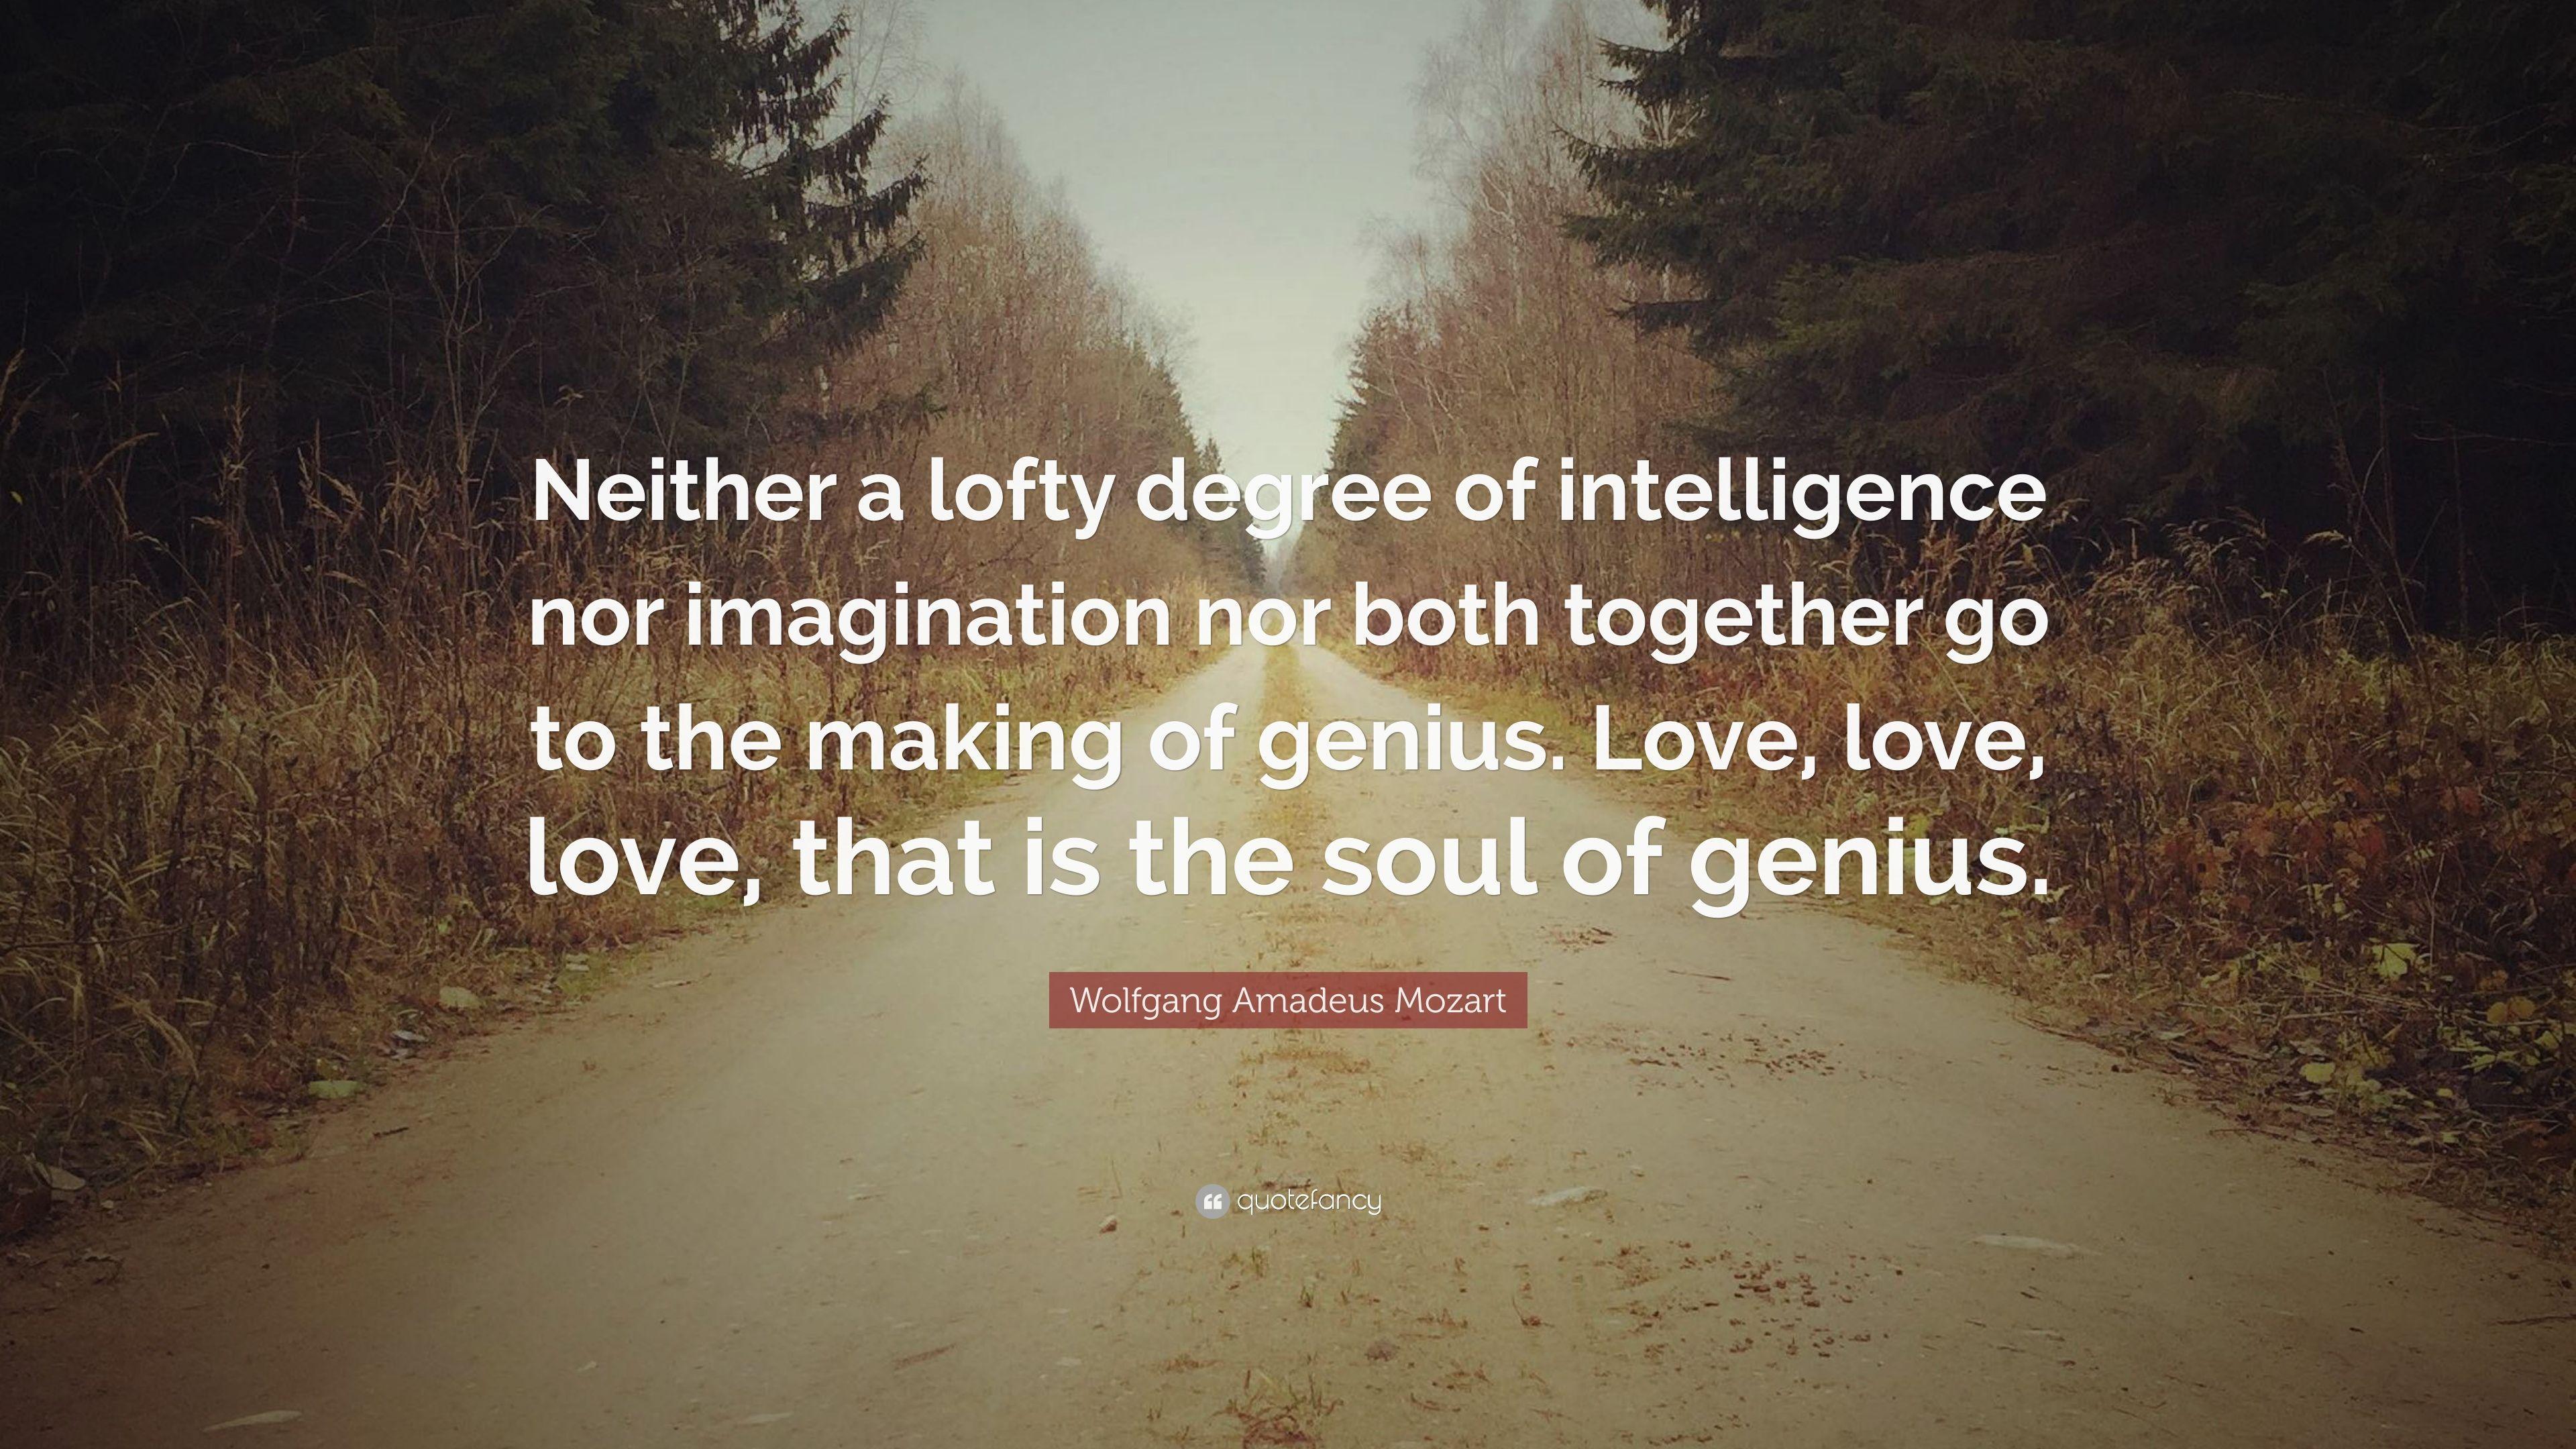 Wolfgang Amadeus Mozart Quote: “Neither a lofty degree